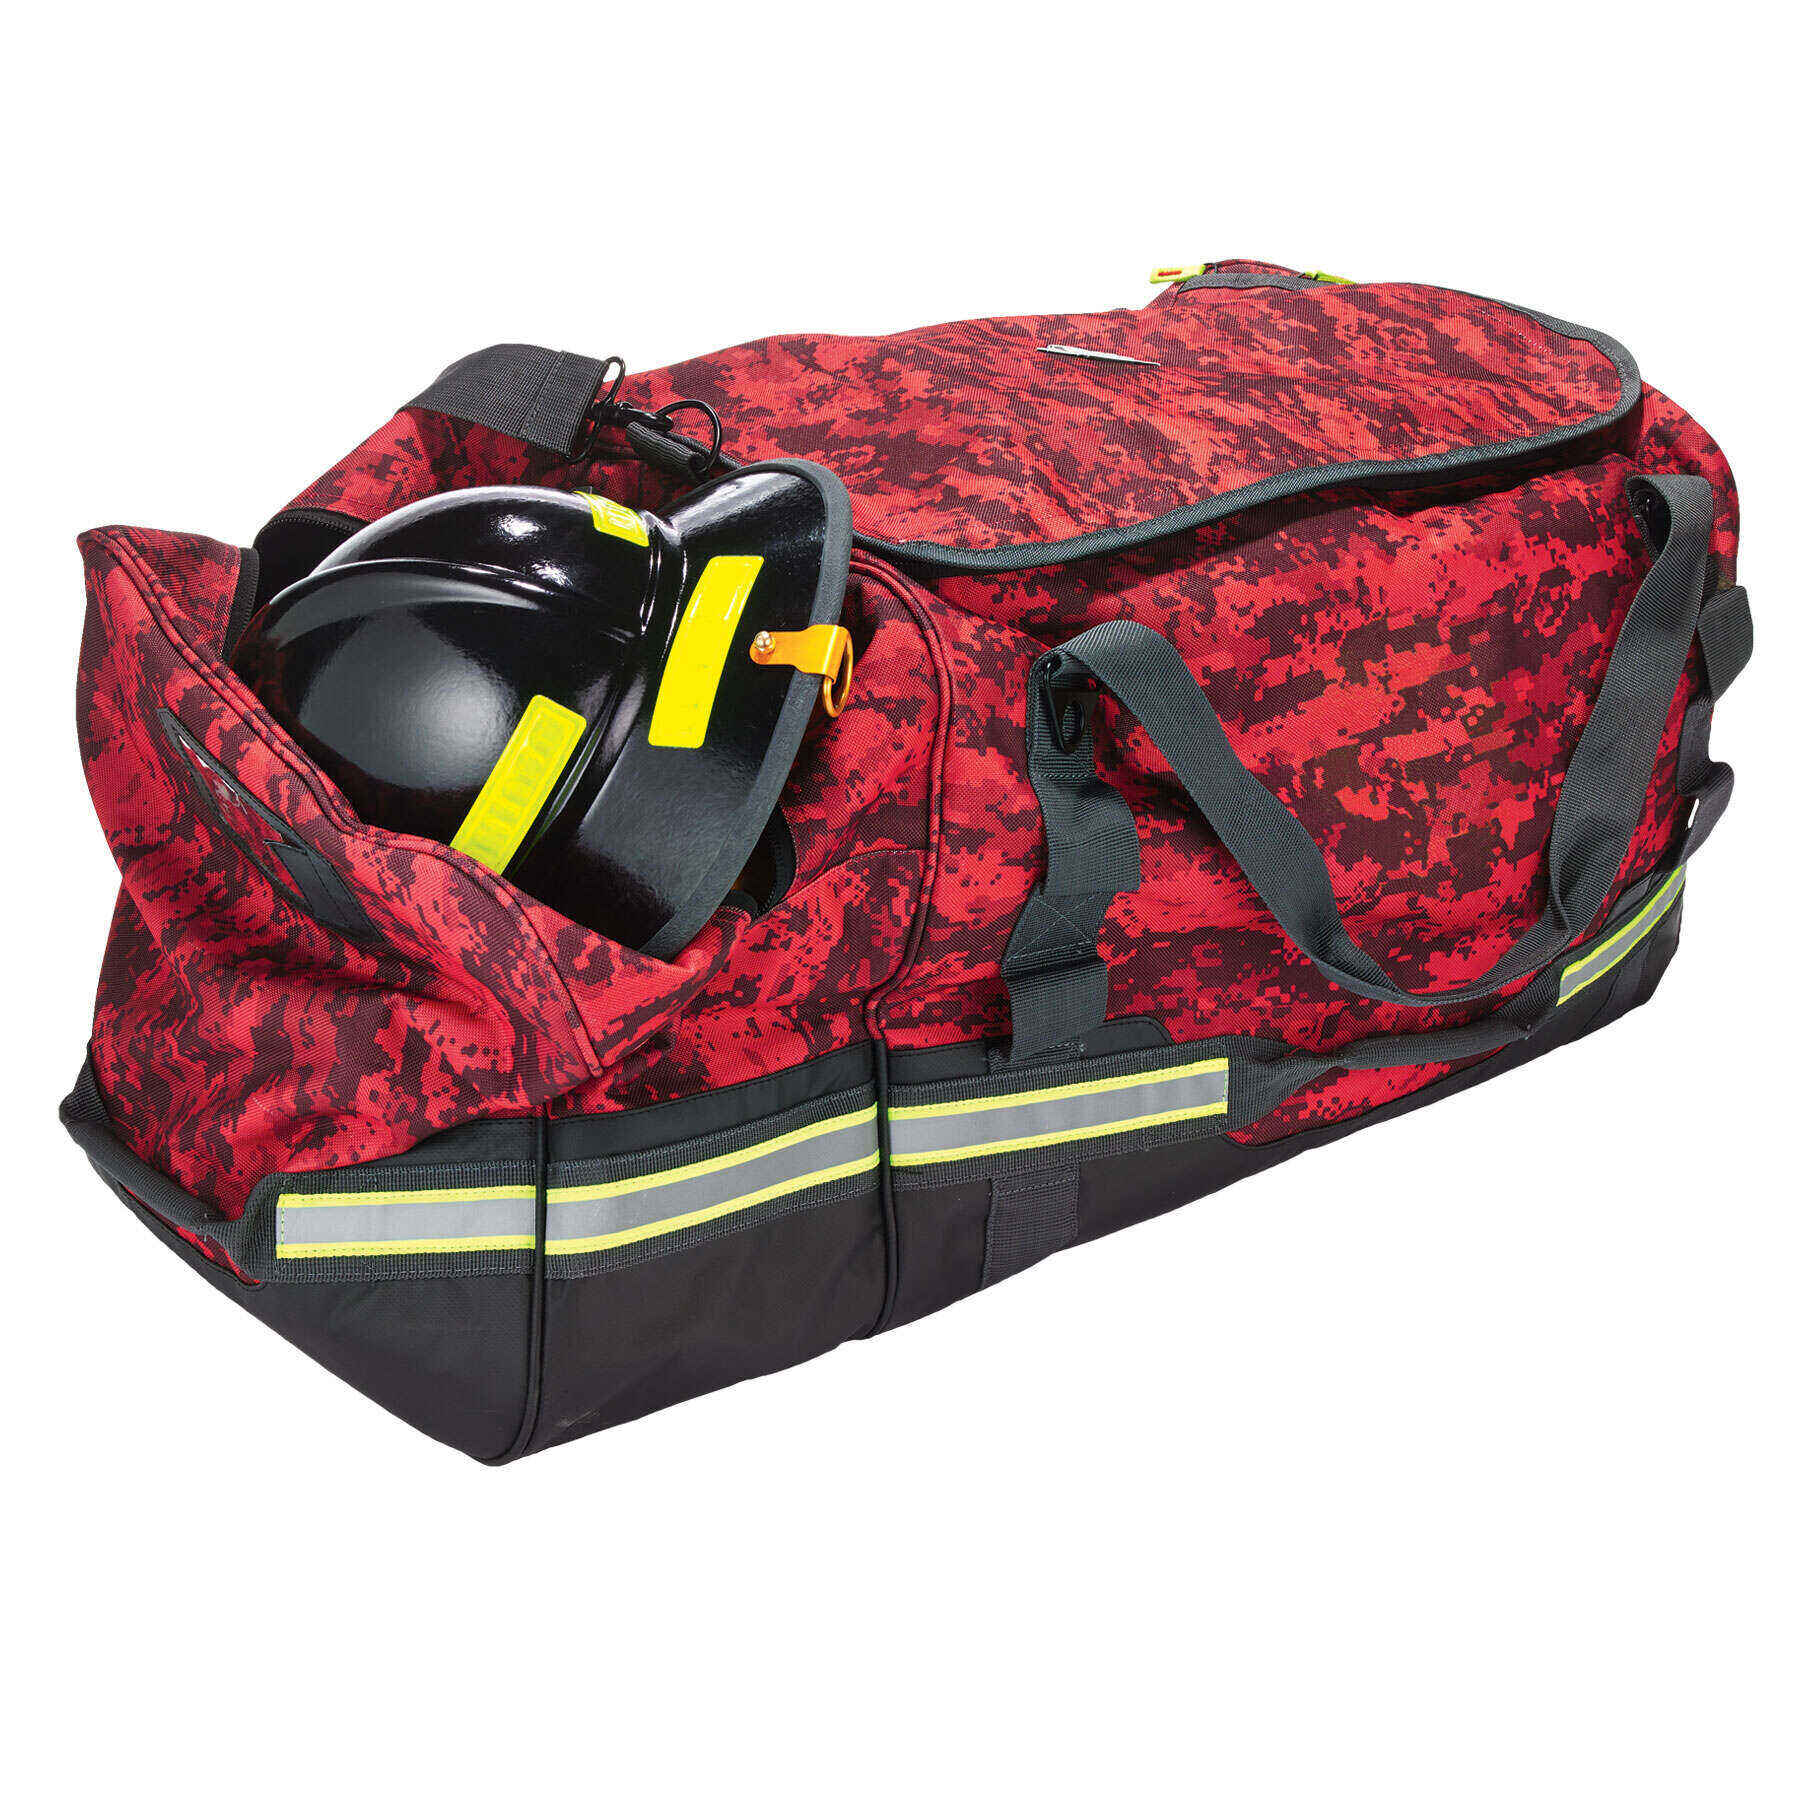 Black And Red Duffel Bag, Holdall Bag